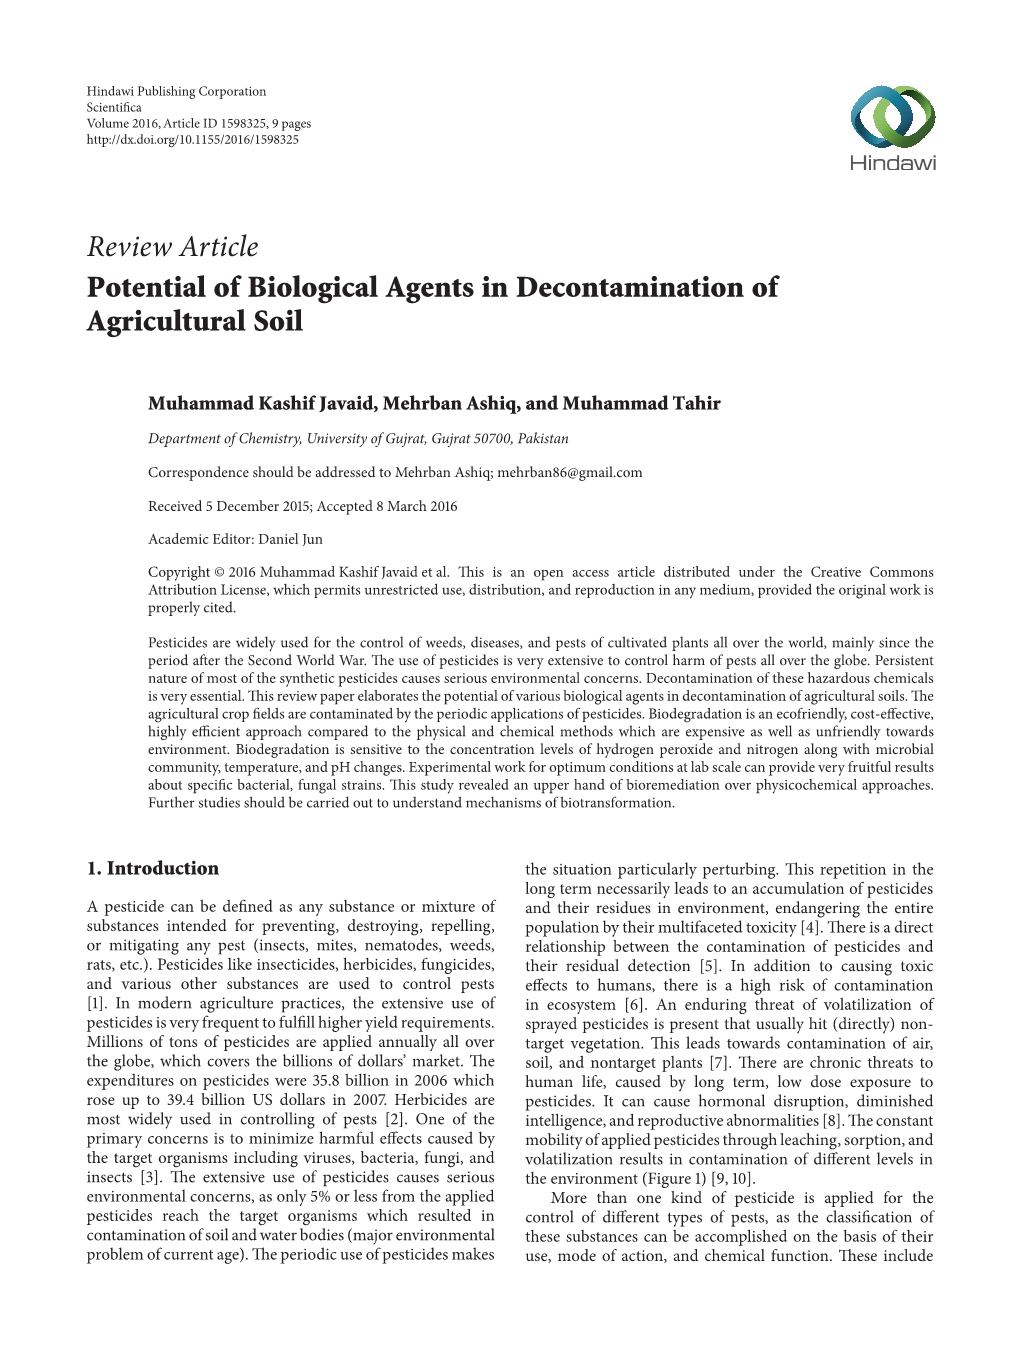 Potential of Biological Agents in Decontamination of Agricultural Soil